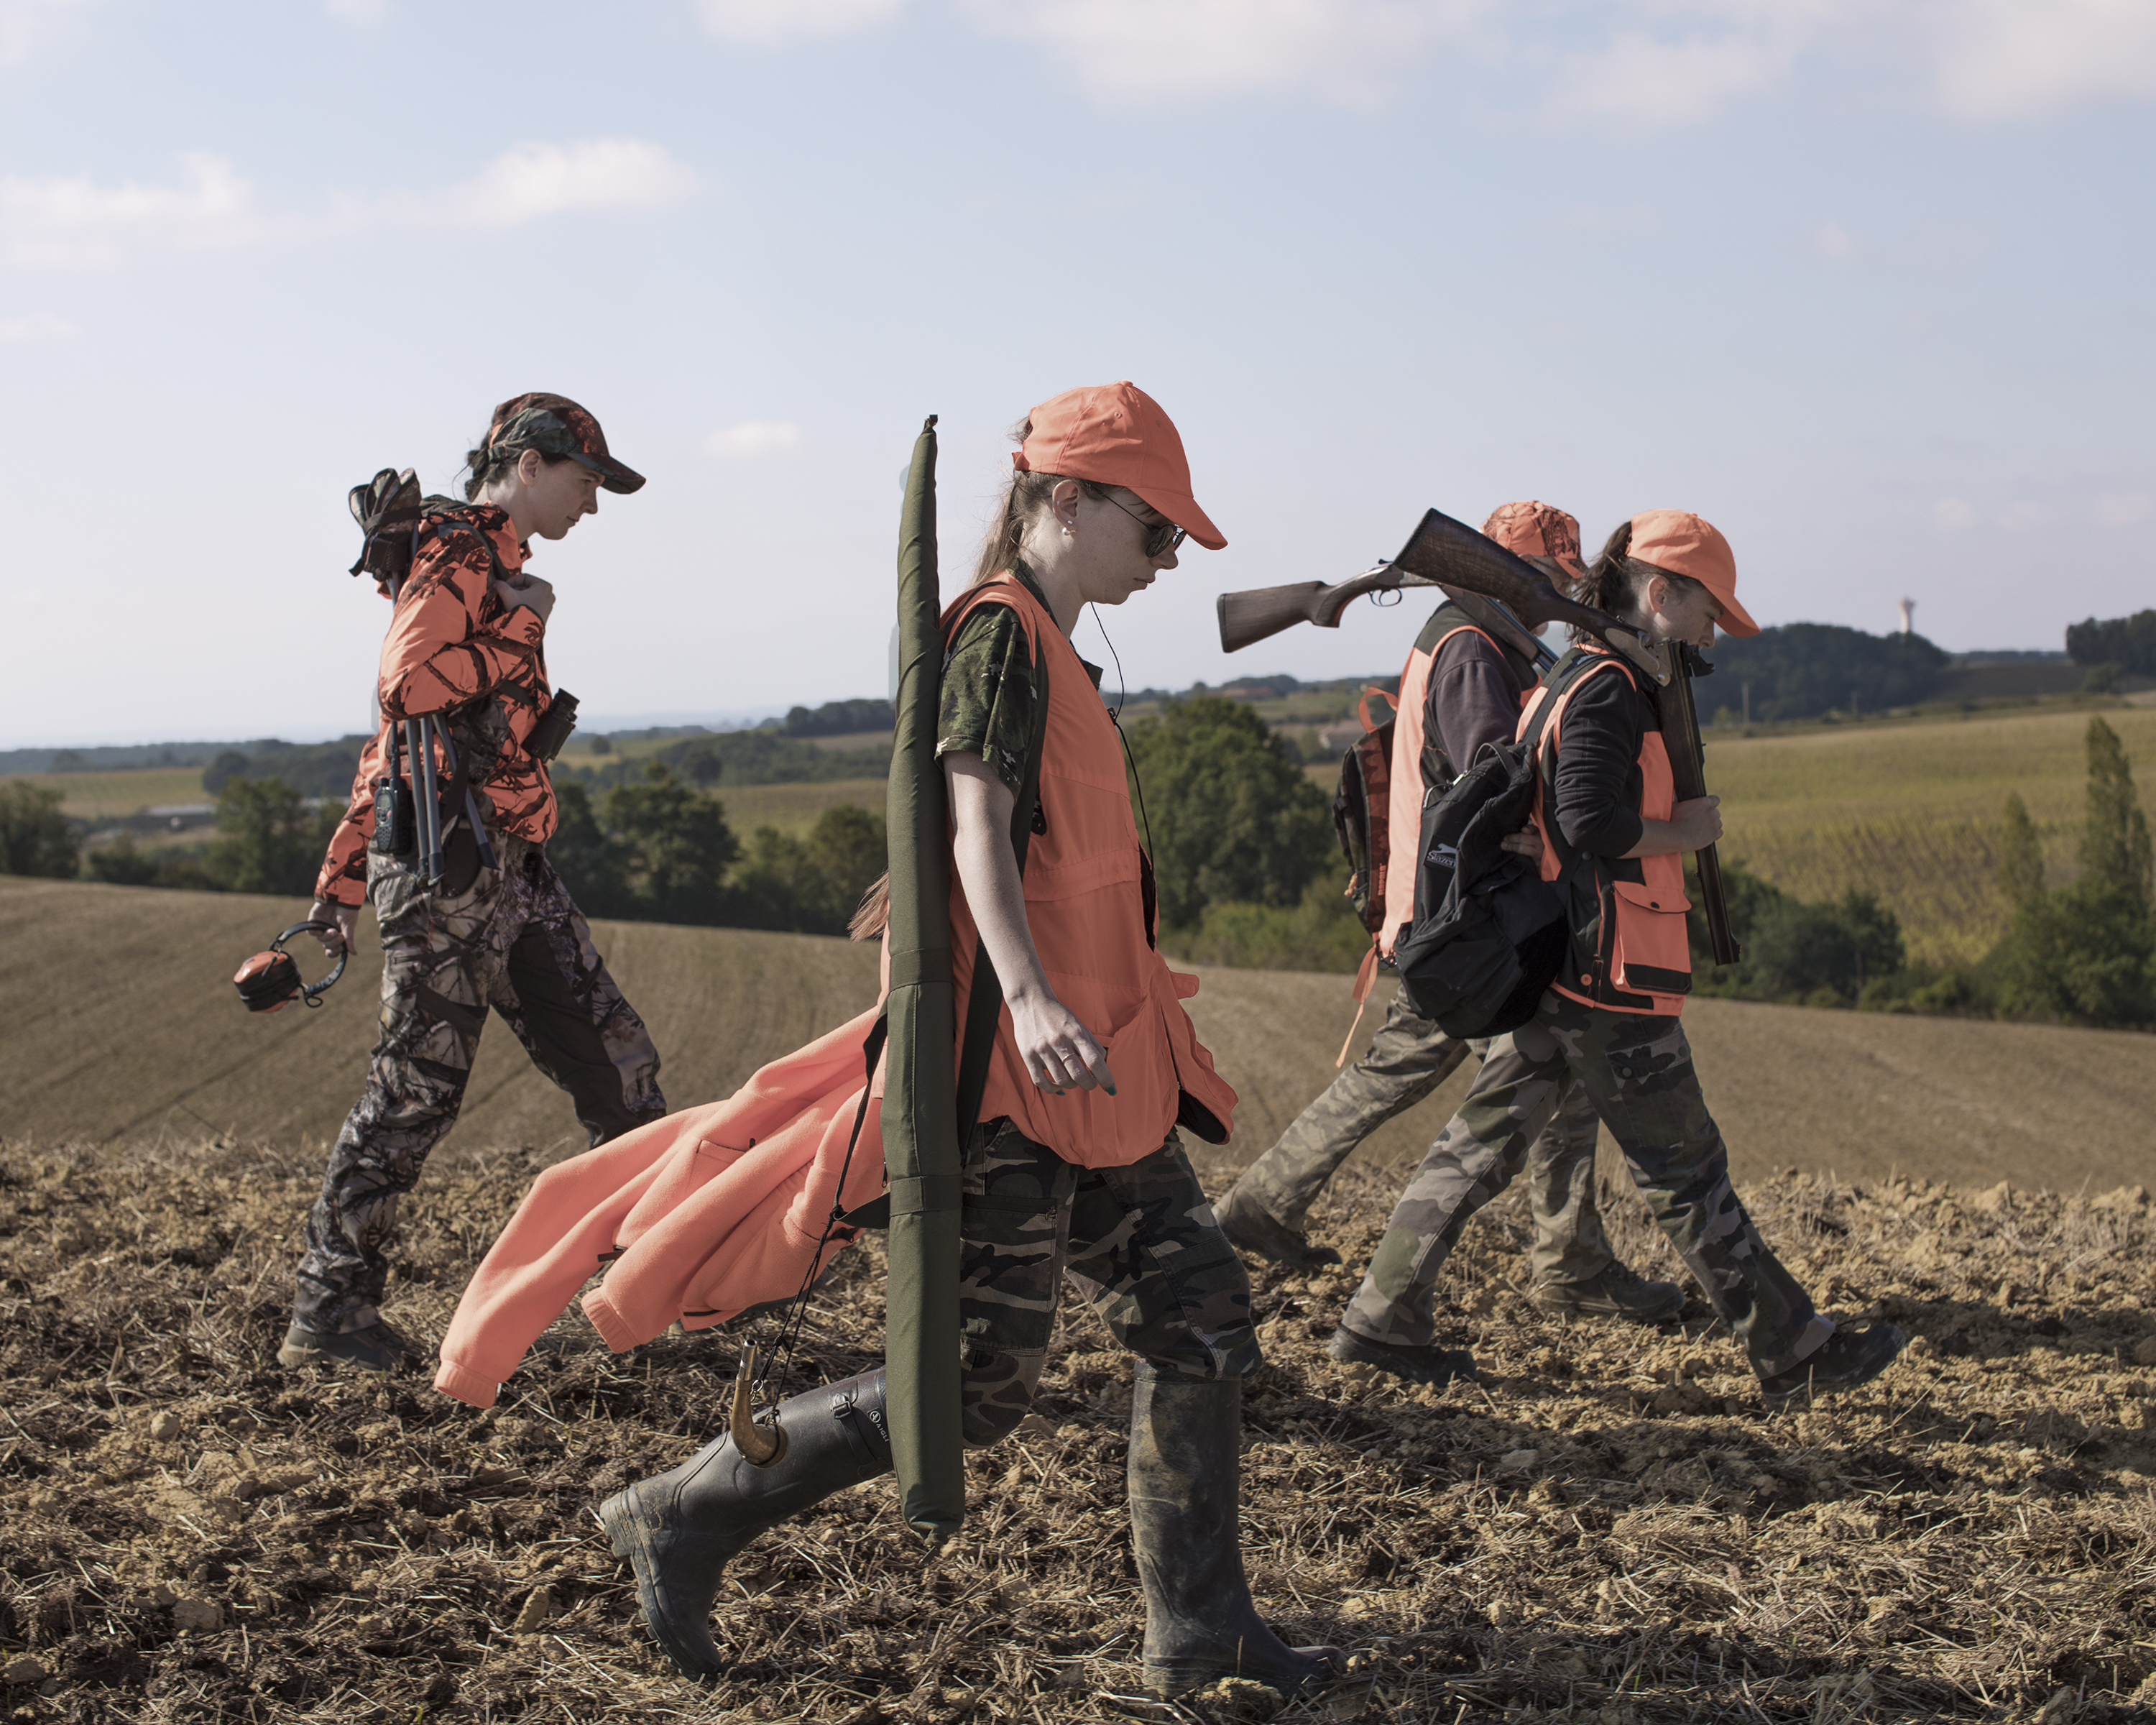 A group of women in orange hunting gear hold guns and walk through a field